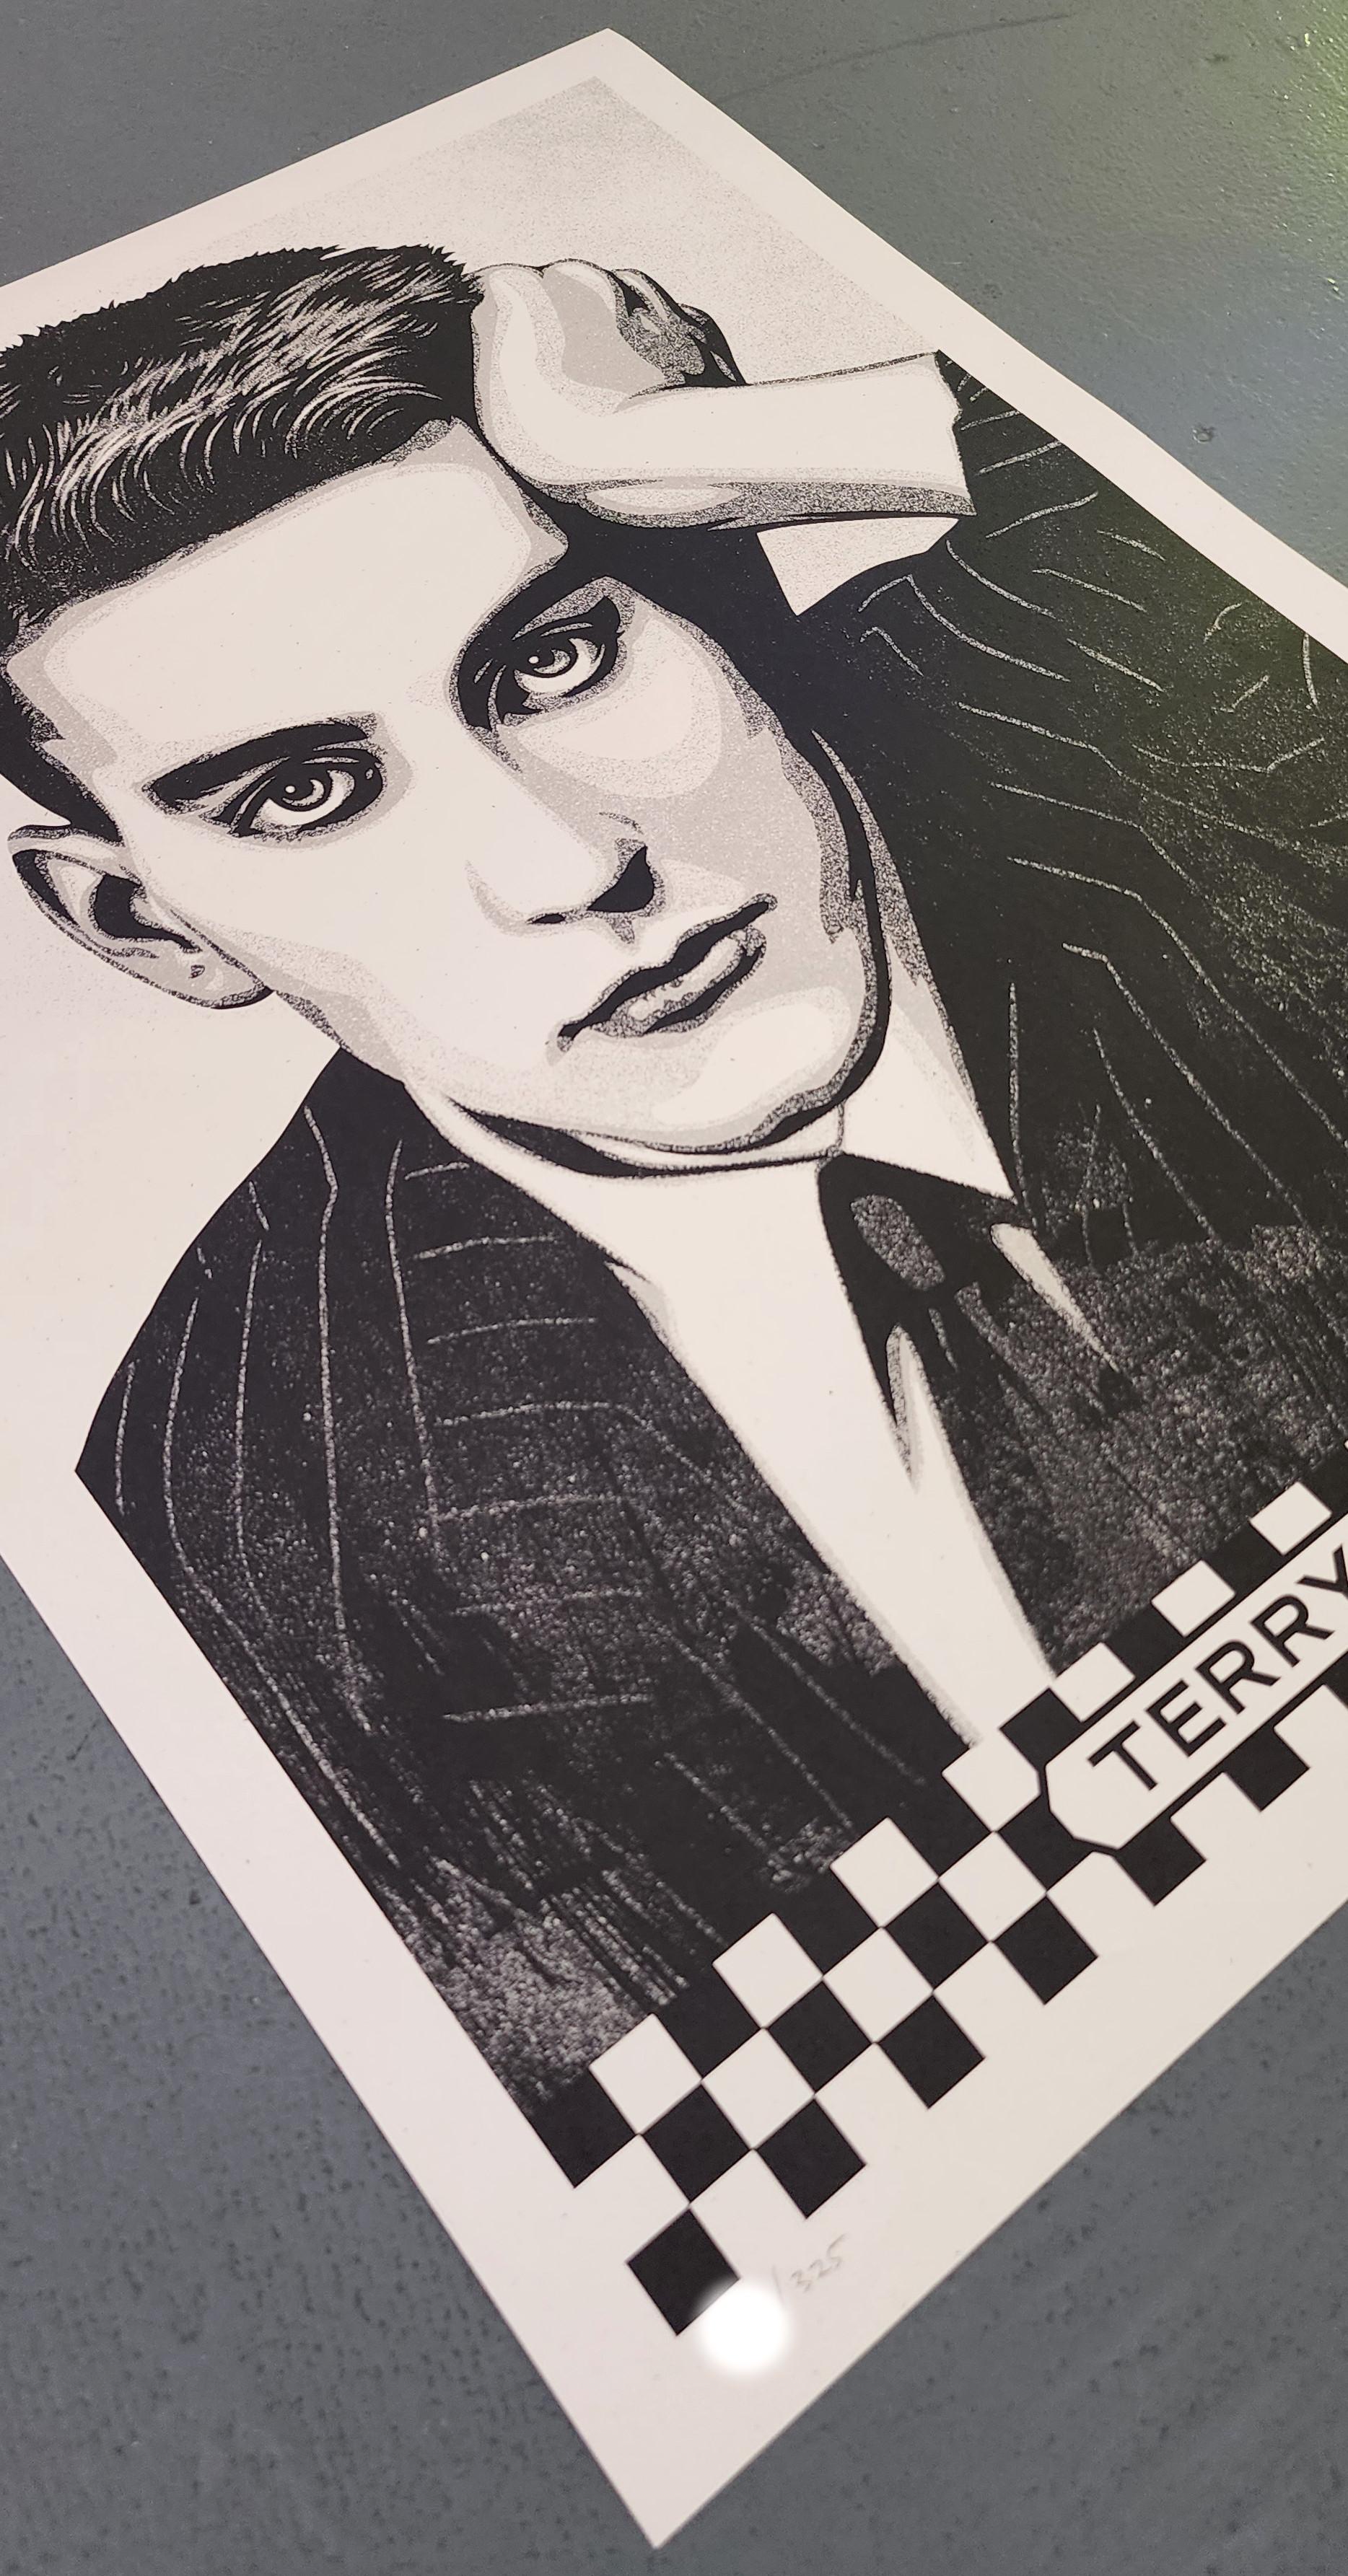 Hommage à Terry Hall (The Specials, Operation Ivy, Fishbone, Chalkie Davies) - 85 New Wave Print par Shepard Fairey